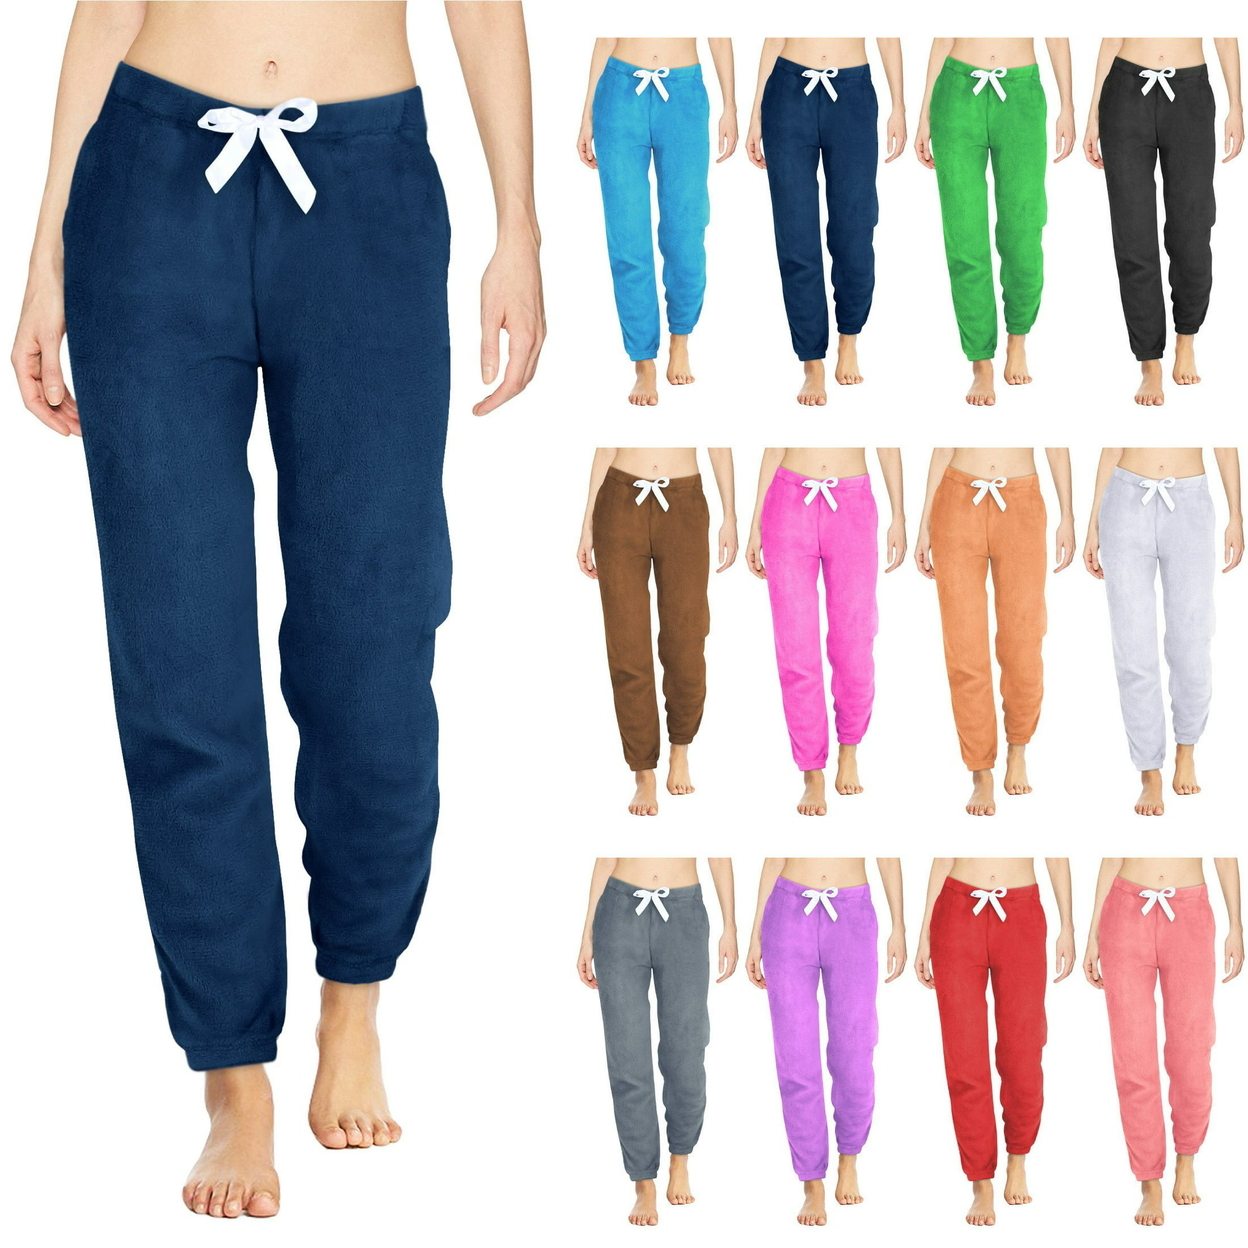 Multi-Pack: Women's Solid & Printed Ultra-Soft Comfy Stretch Micro-Fleece Pajama Lounge Pants - 1-pack, Medium, Love